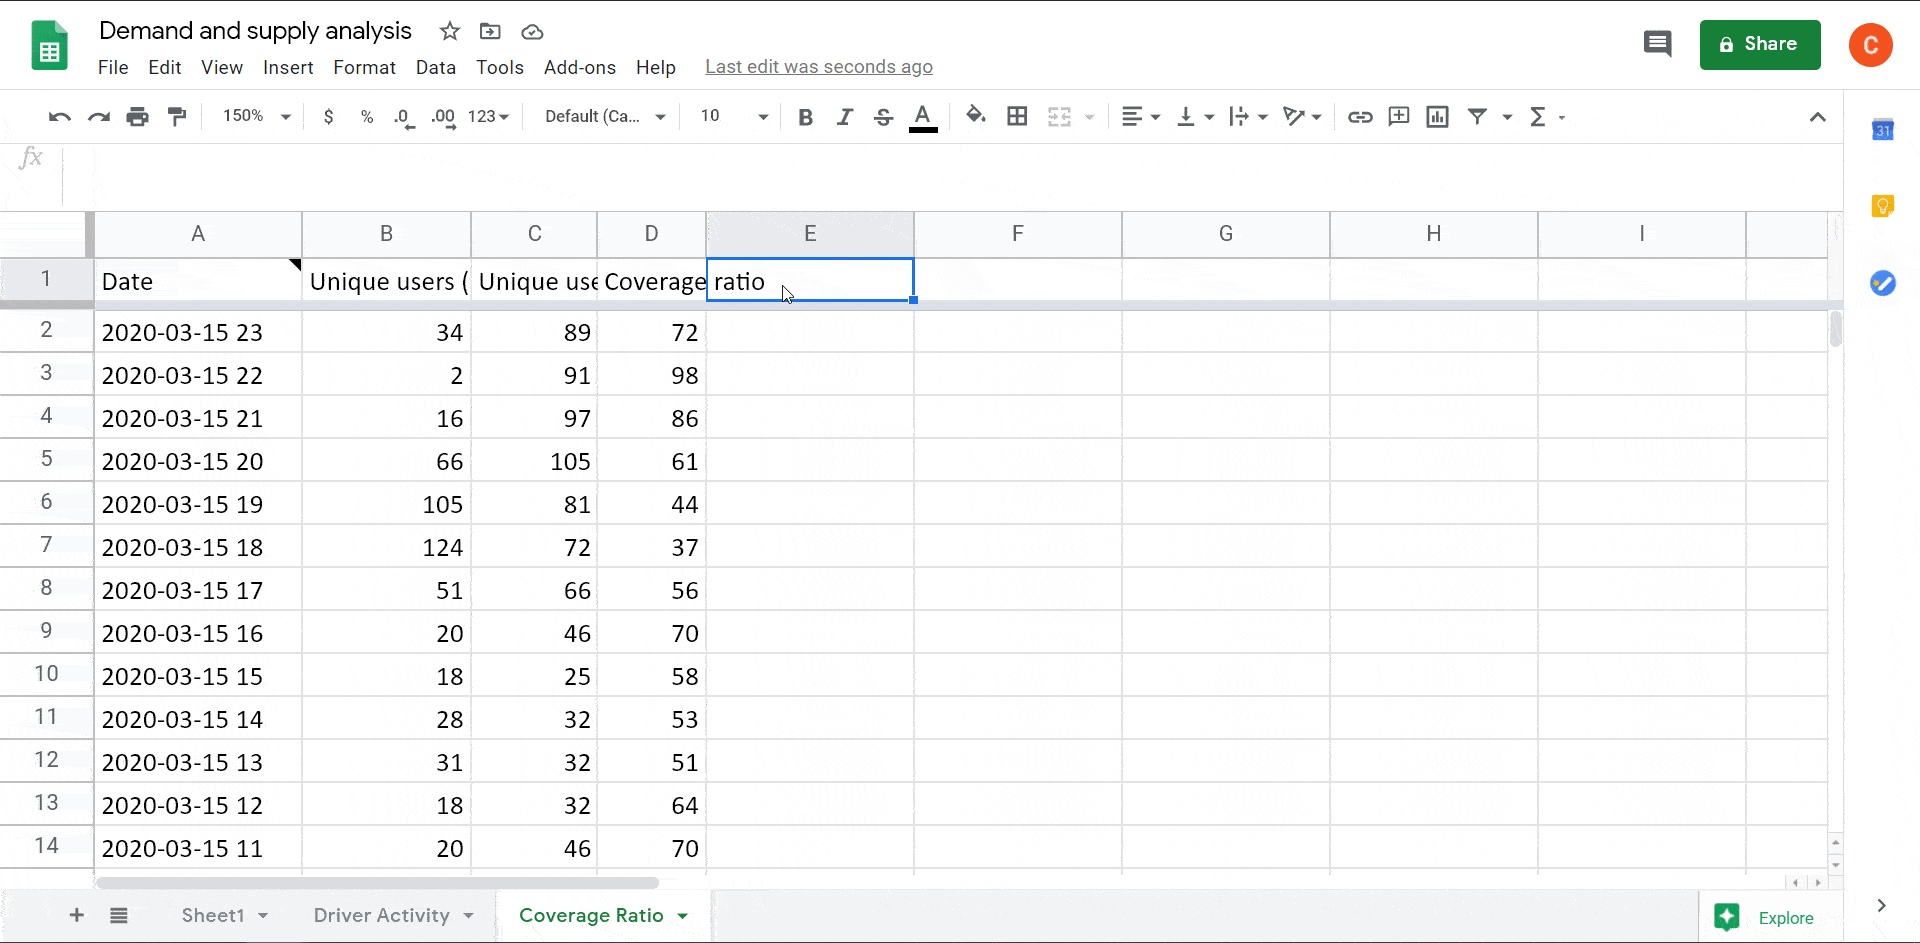 How to split the date-time values into date and time